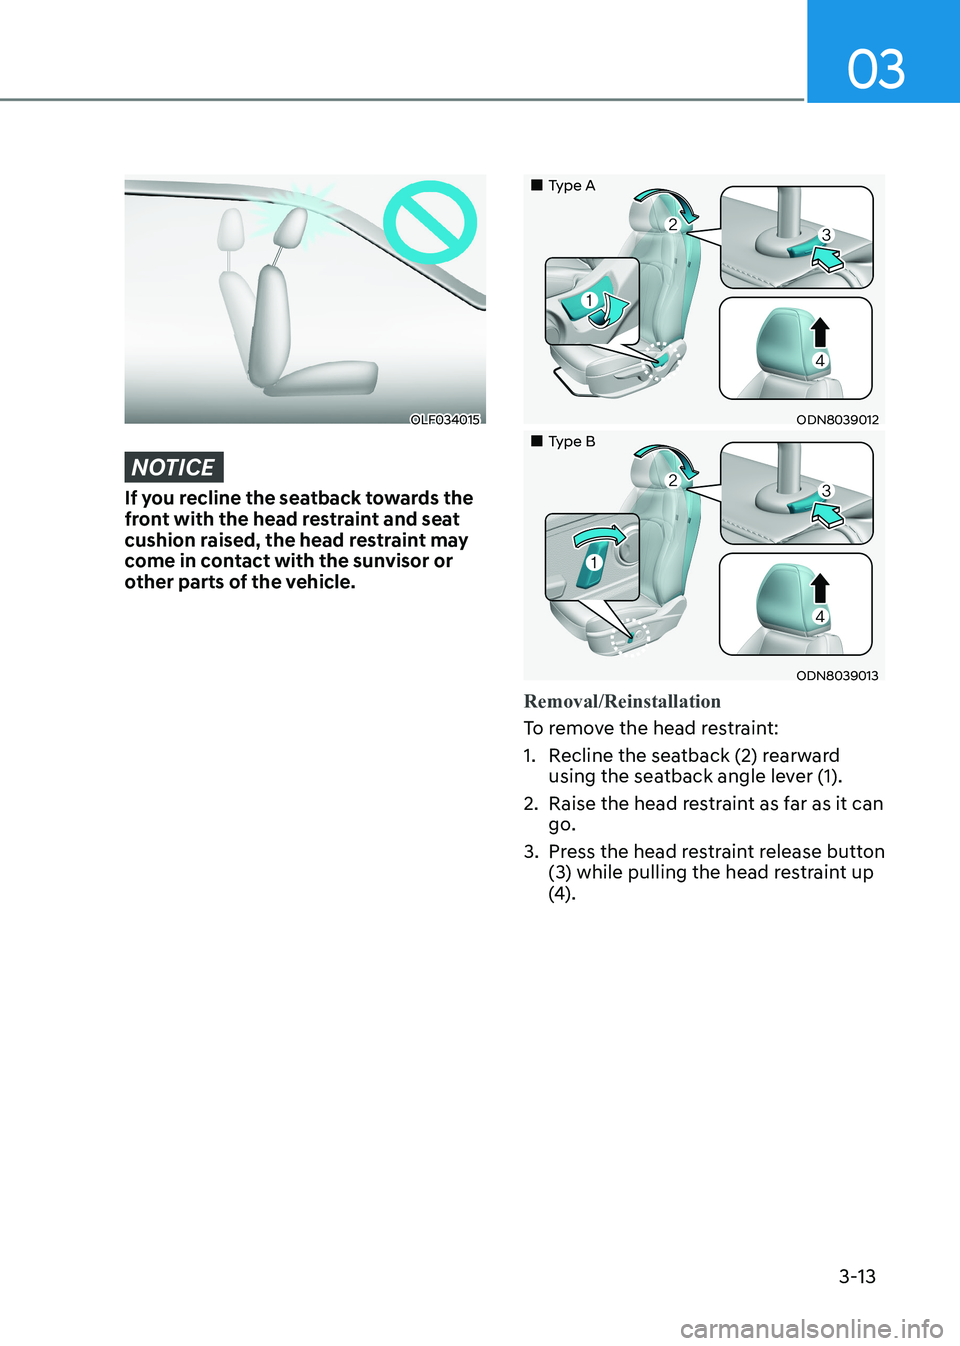 HYUNDAI SONATA 2023  Owners Manual 03
3-13
OLF034015
NOTICE
If you recline the seatback towards the  
front with the head restraint and seat 
cushion raised, the head restraint may 
come in contact with the sunvisor or 
other parts of 